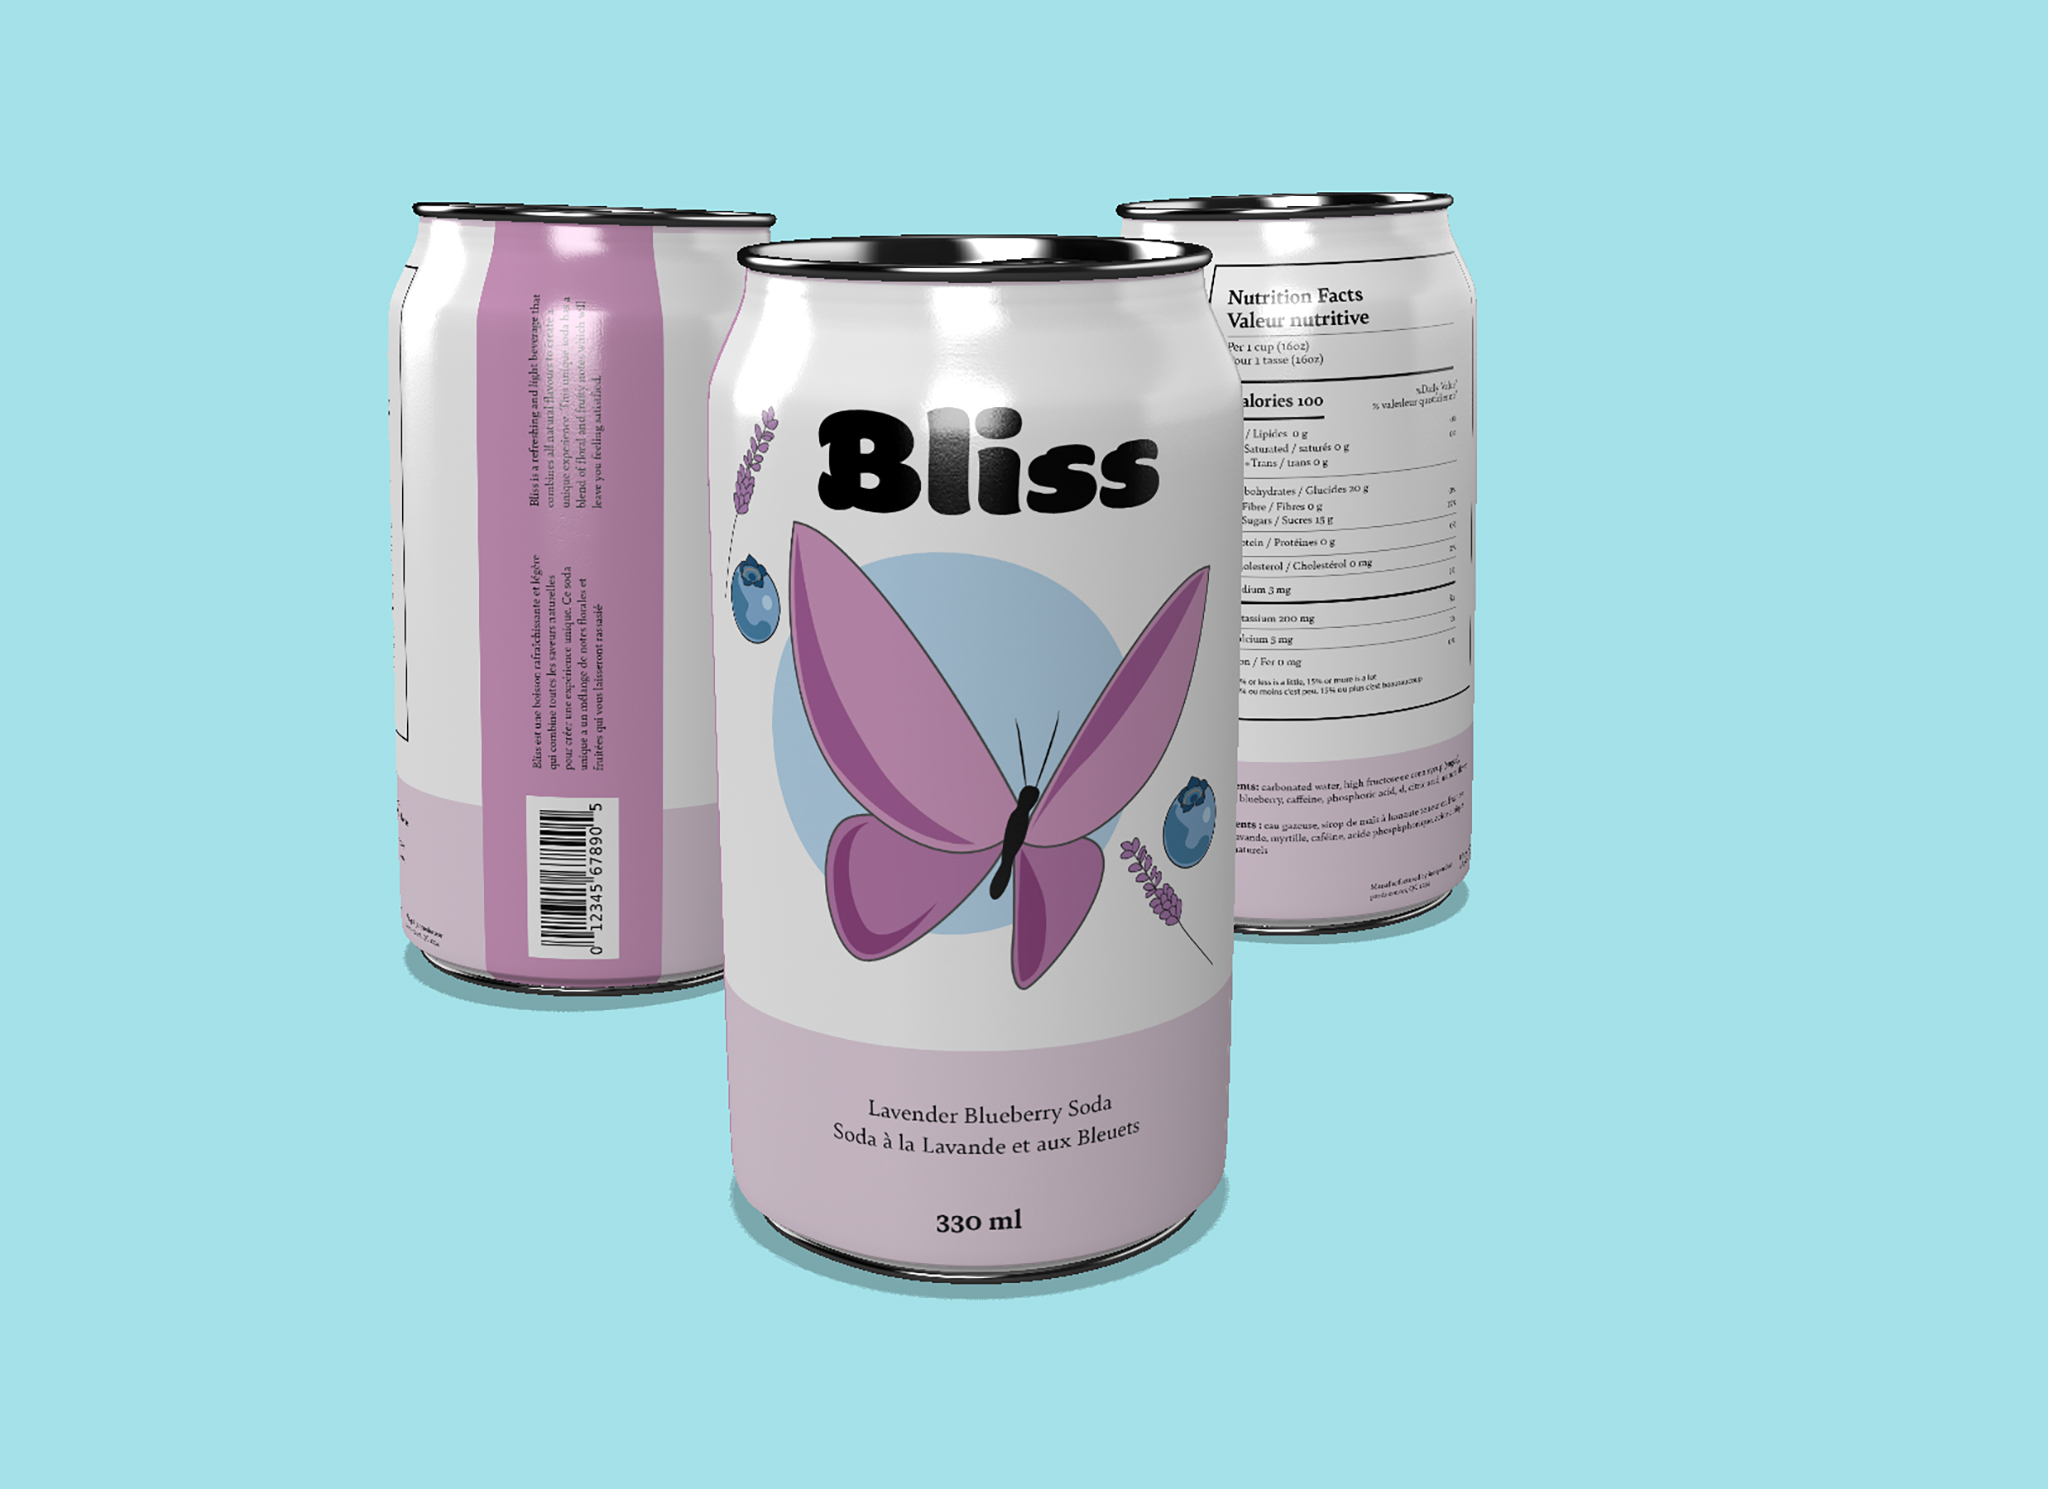 A lilac purple soda can with the flavour "lavender and blueberry". There is an illustration of a butterfly in the middle